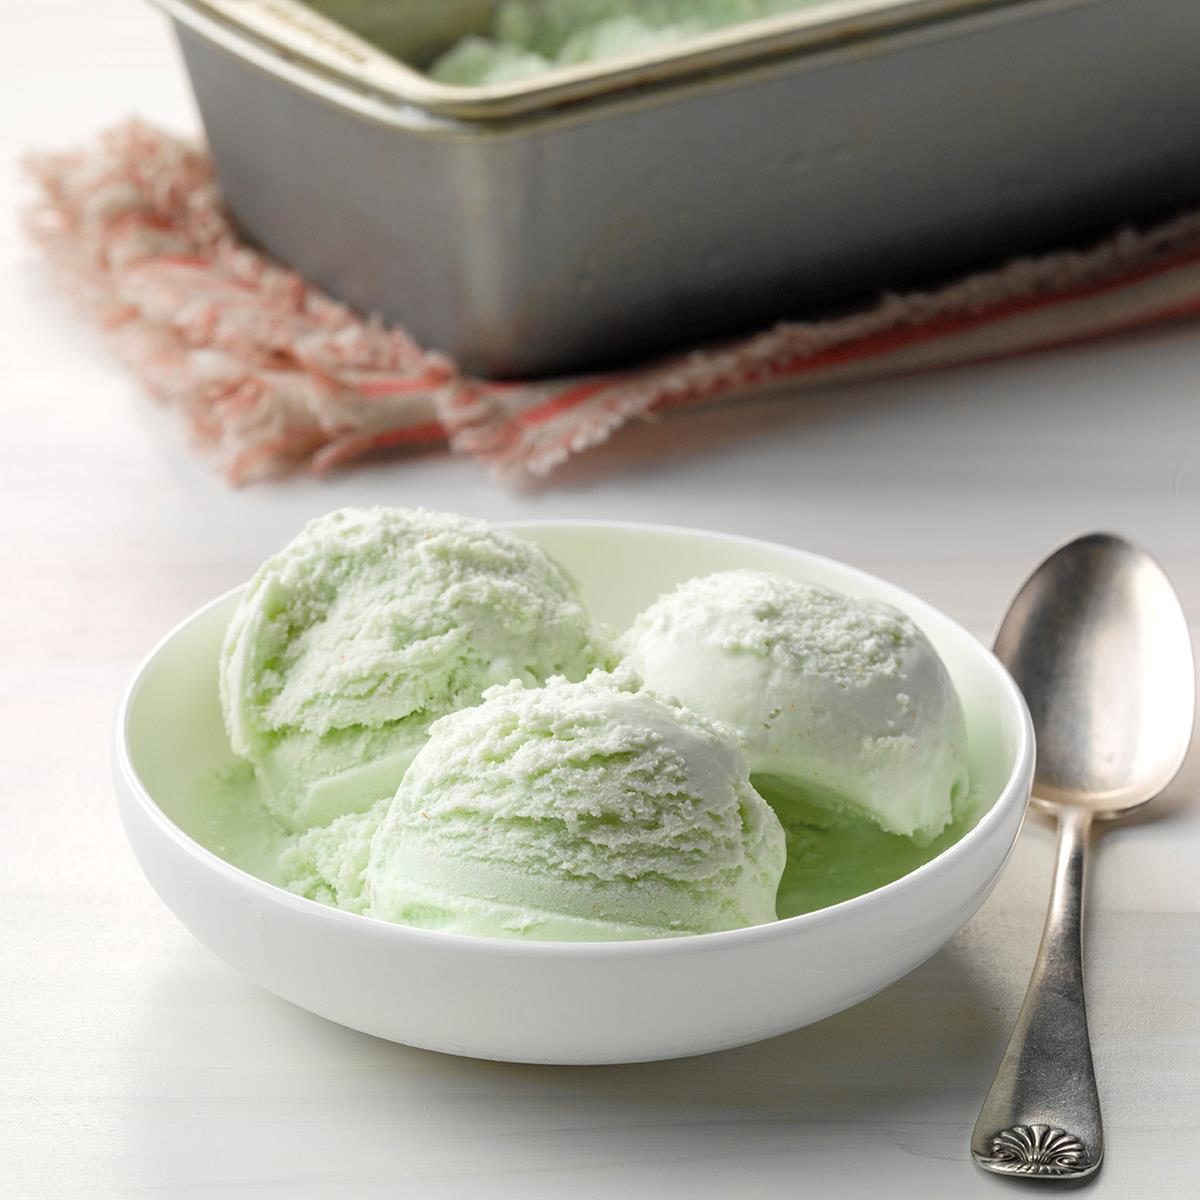 https://www.tasteofhome.com/wp-content/uploads/2019/02/Red-Curry-Pandan-Ice-Cream_EXPS_DAI18_134798_E08_29_2b.jpg?fit=700%2C1024